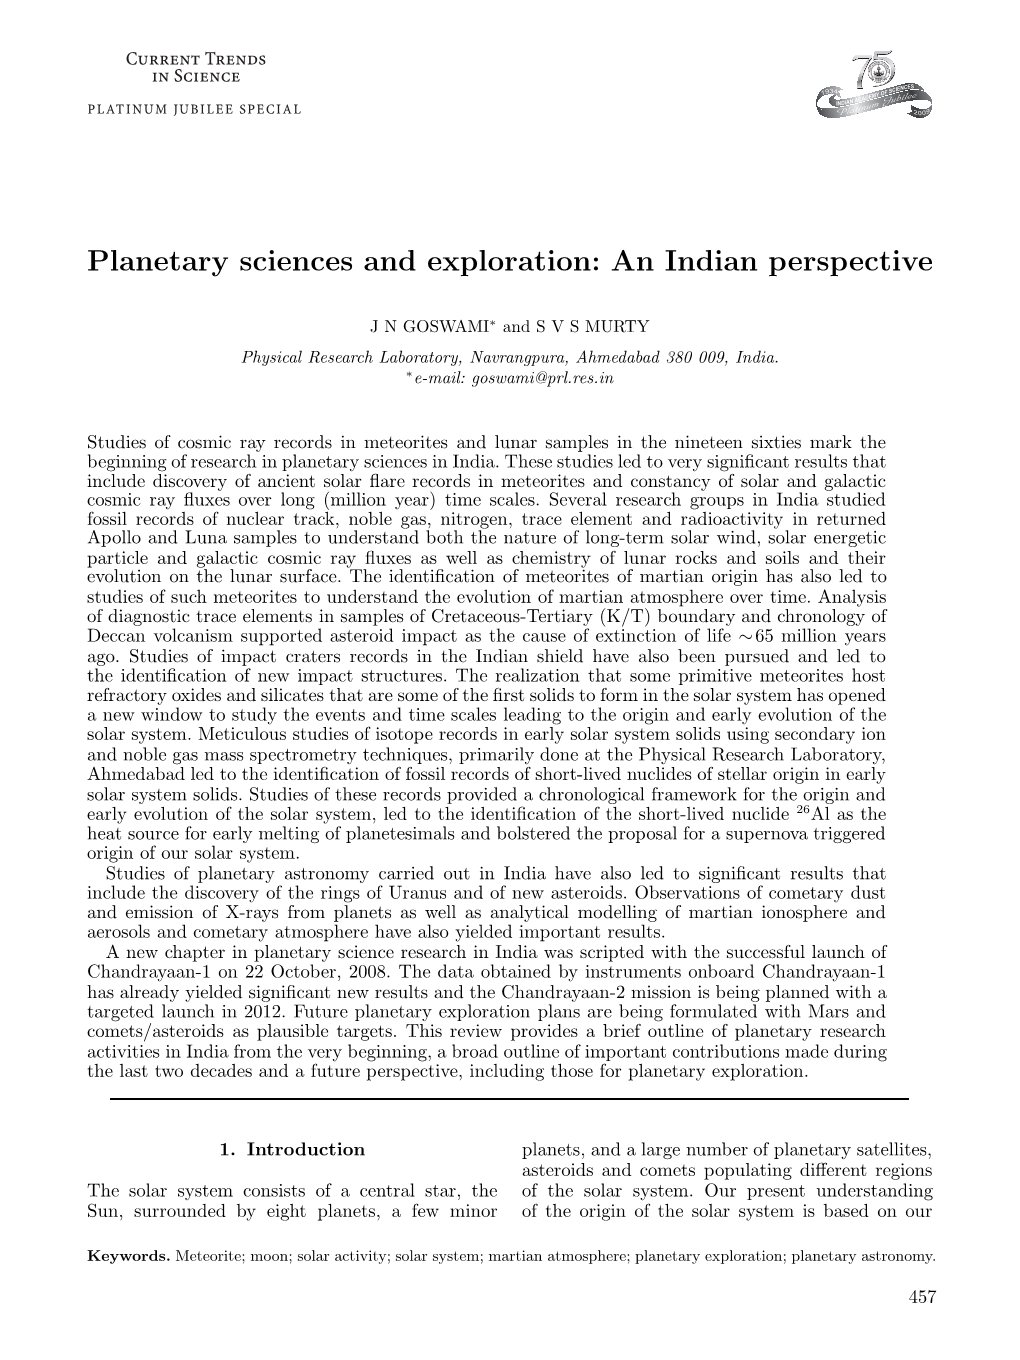 Planetary Sciences and Exploration: an Indian Perspective